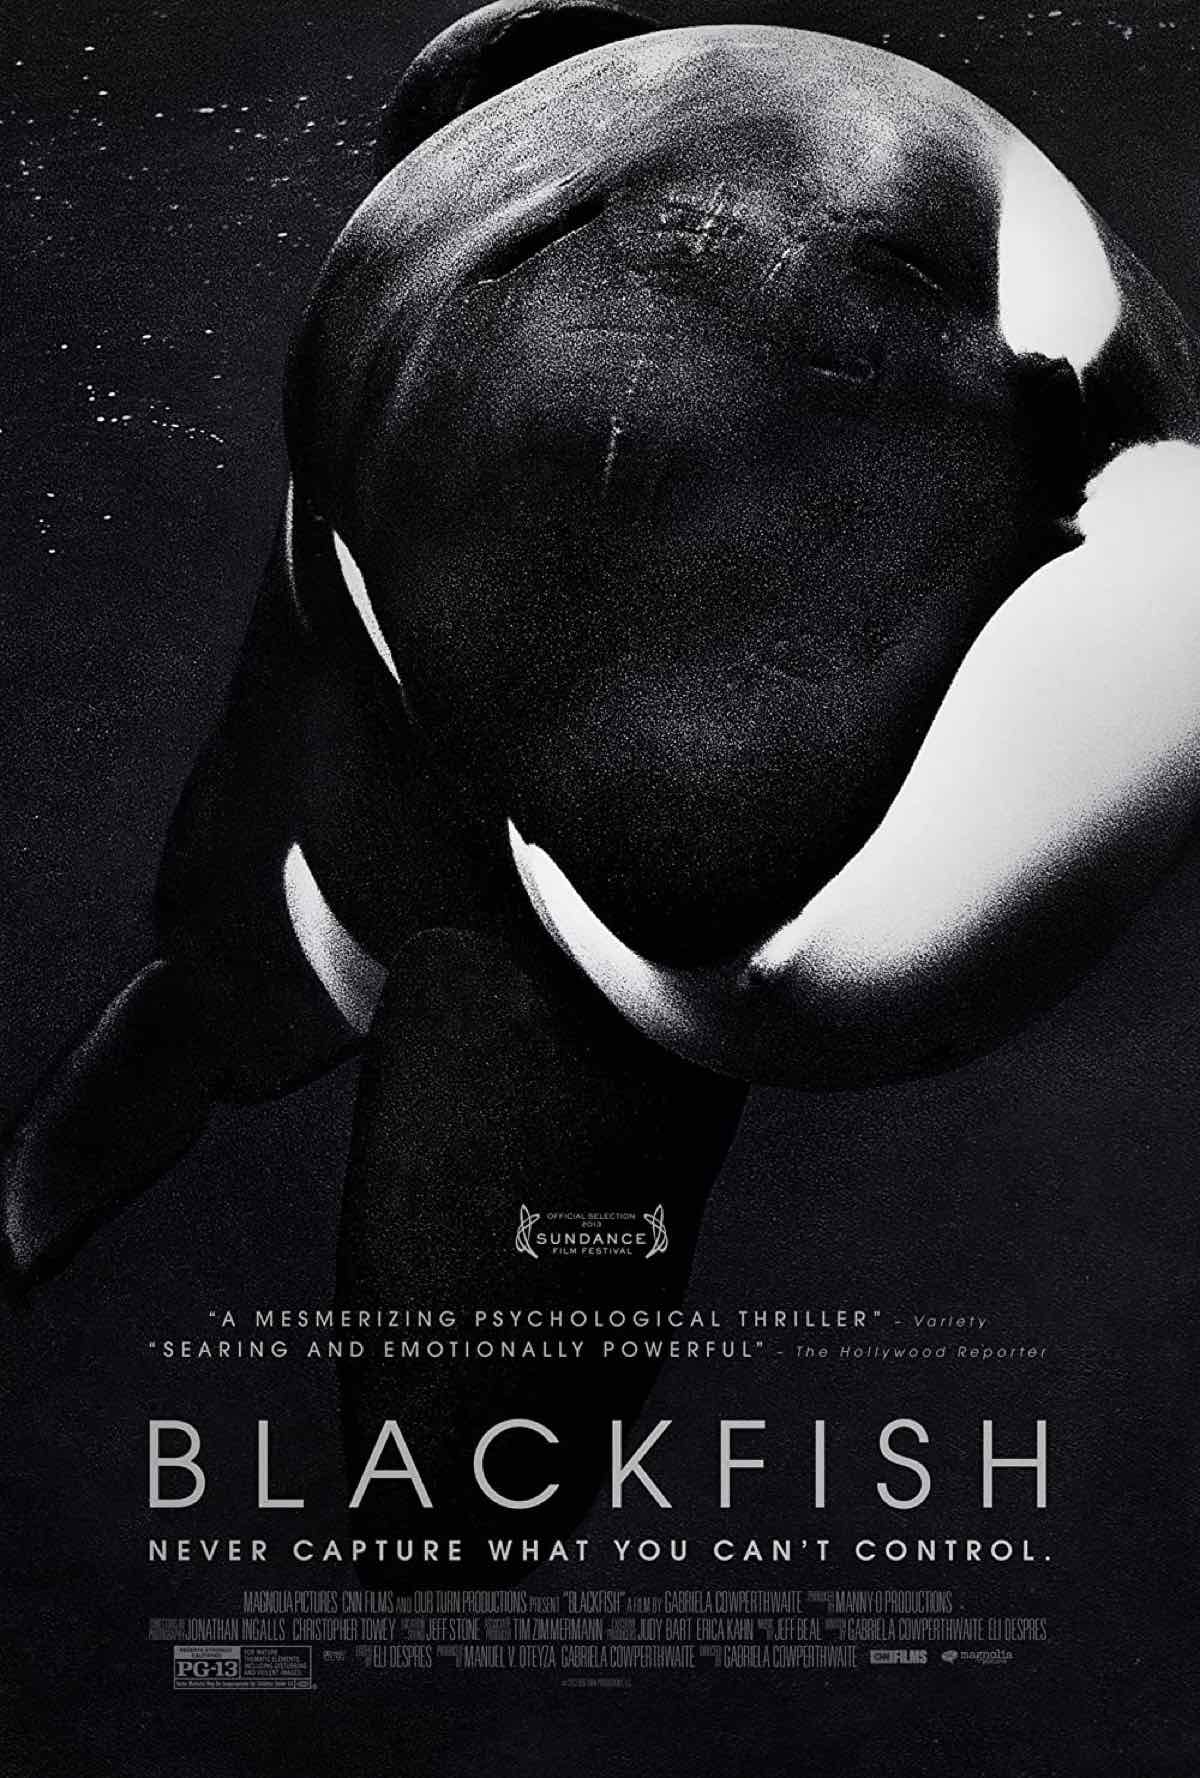 Blackfish documentary movie poster about SeaWorld and orcas and captive animals. 